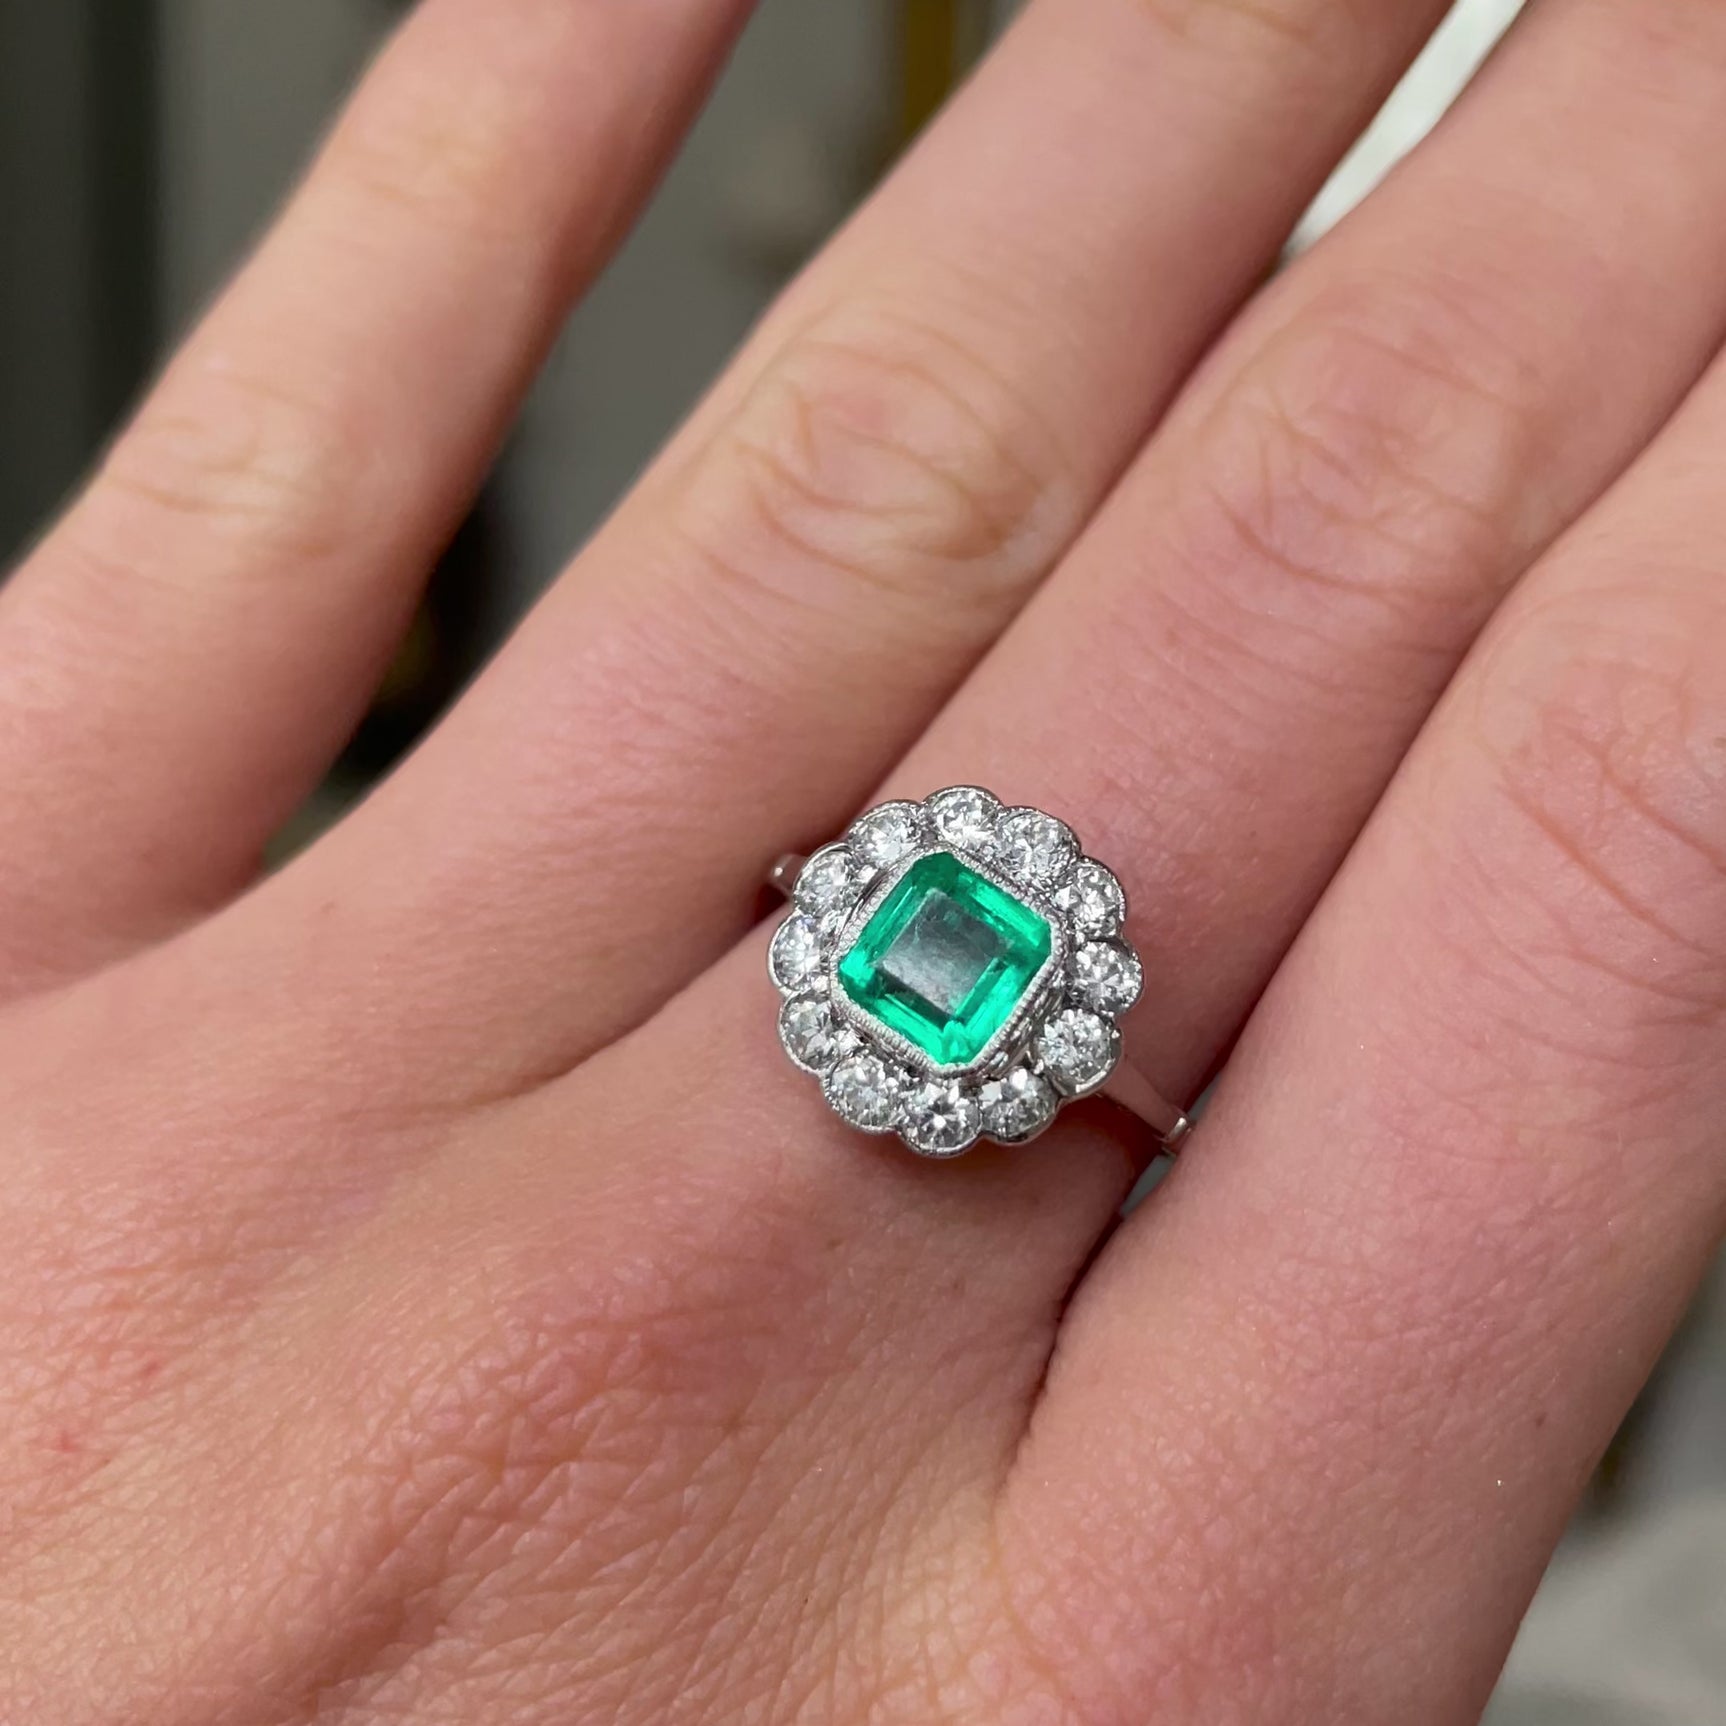 Edwardian emerald and diamond cluster ring, worn on hand and rotated to give perspective.